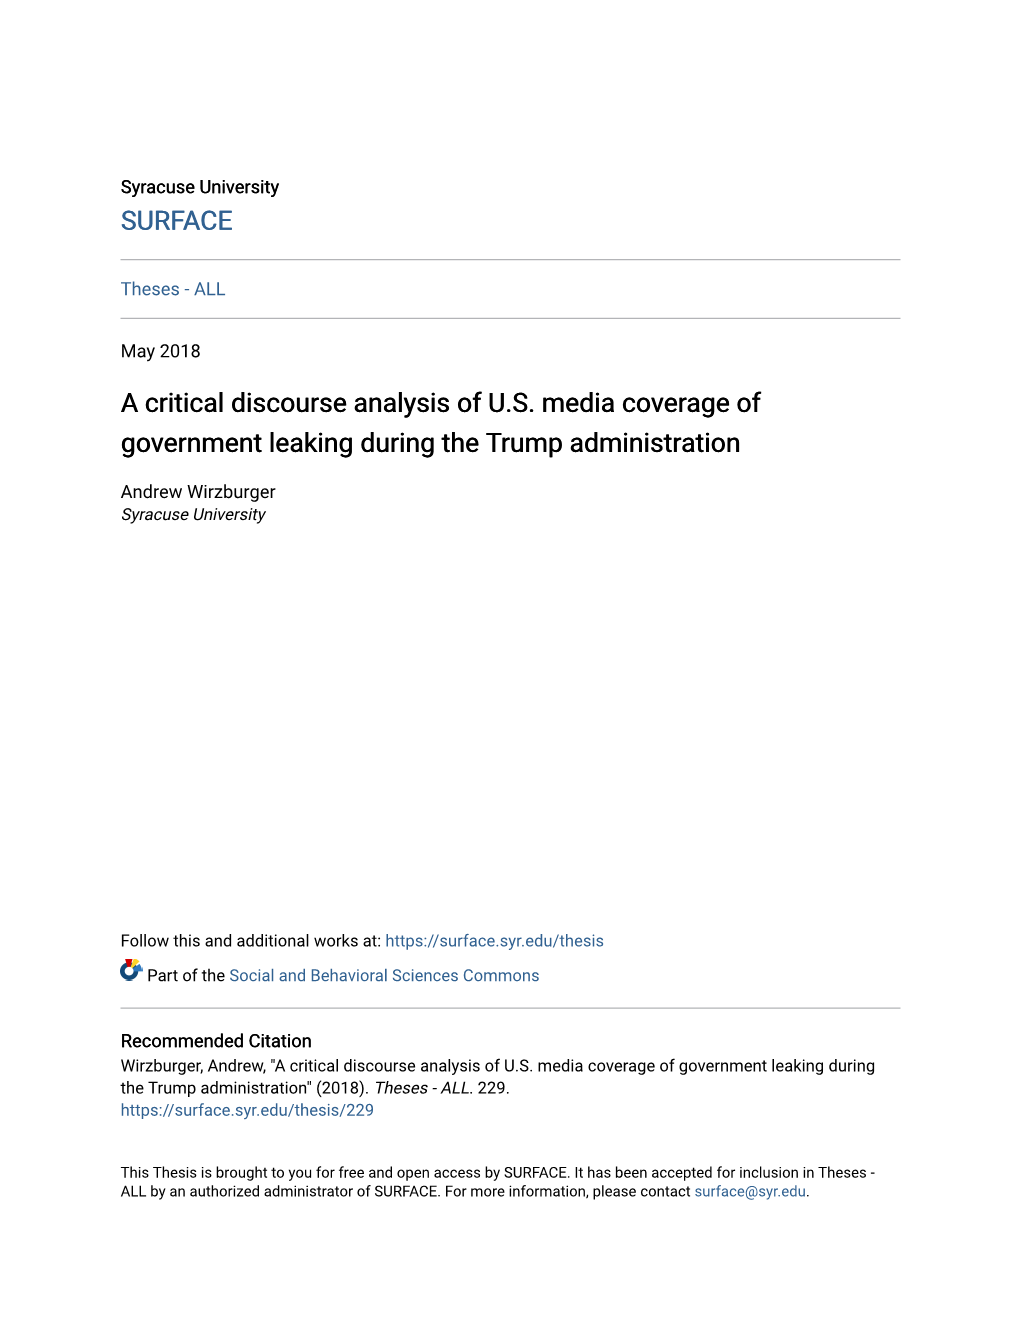 A Critical Discourse Analysis of U.S. Media Coverage of Government Leaking During the Trump Administration